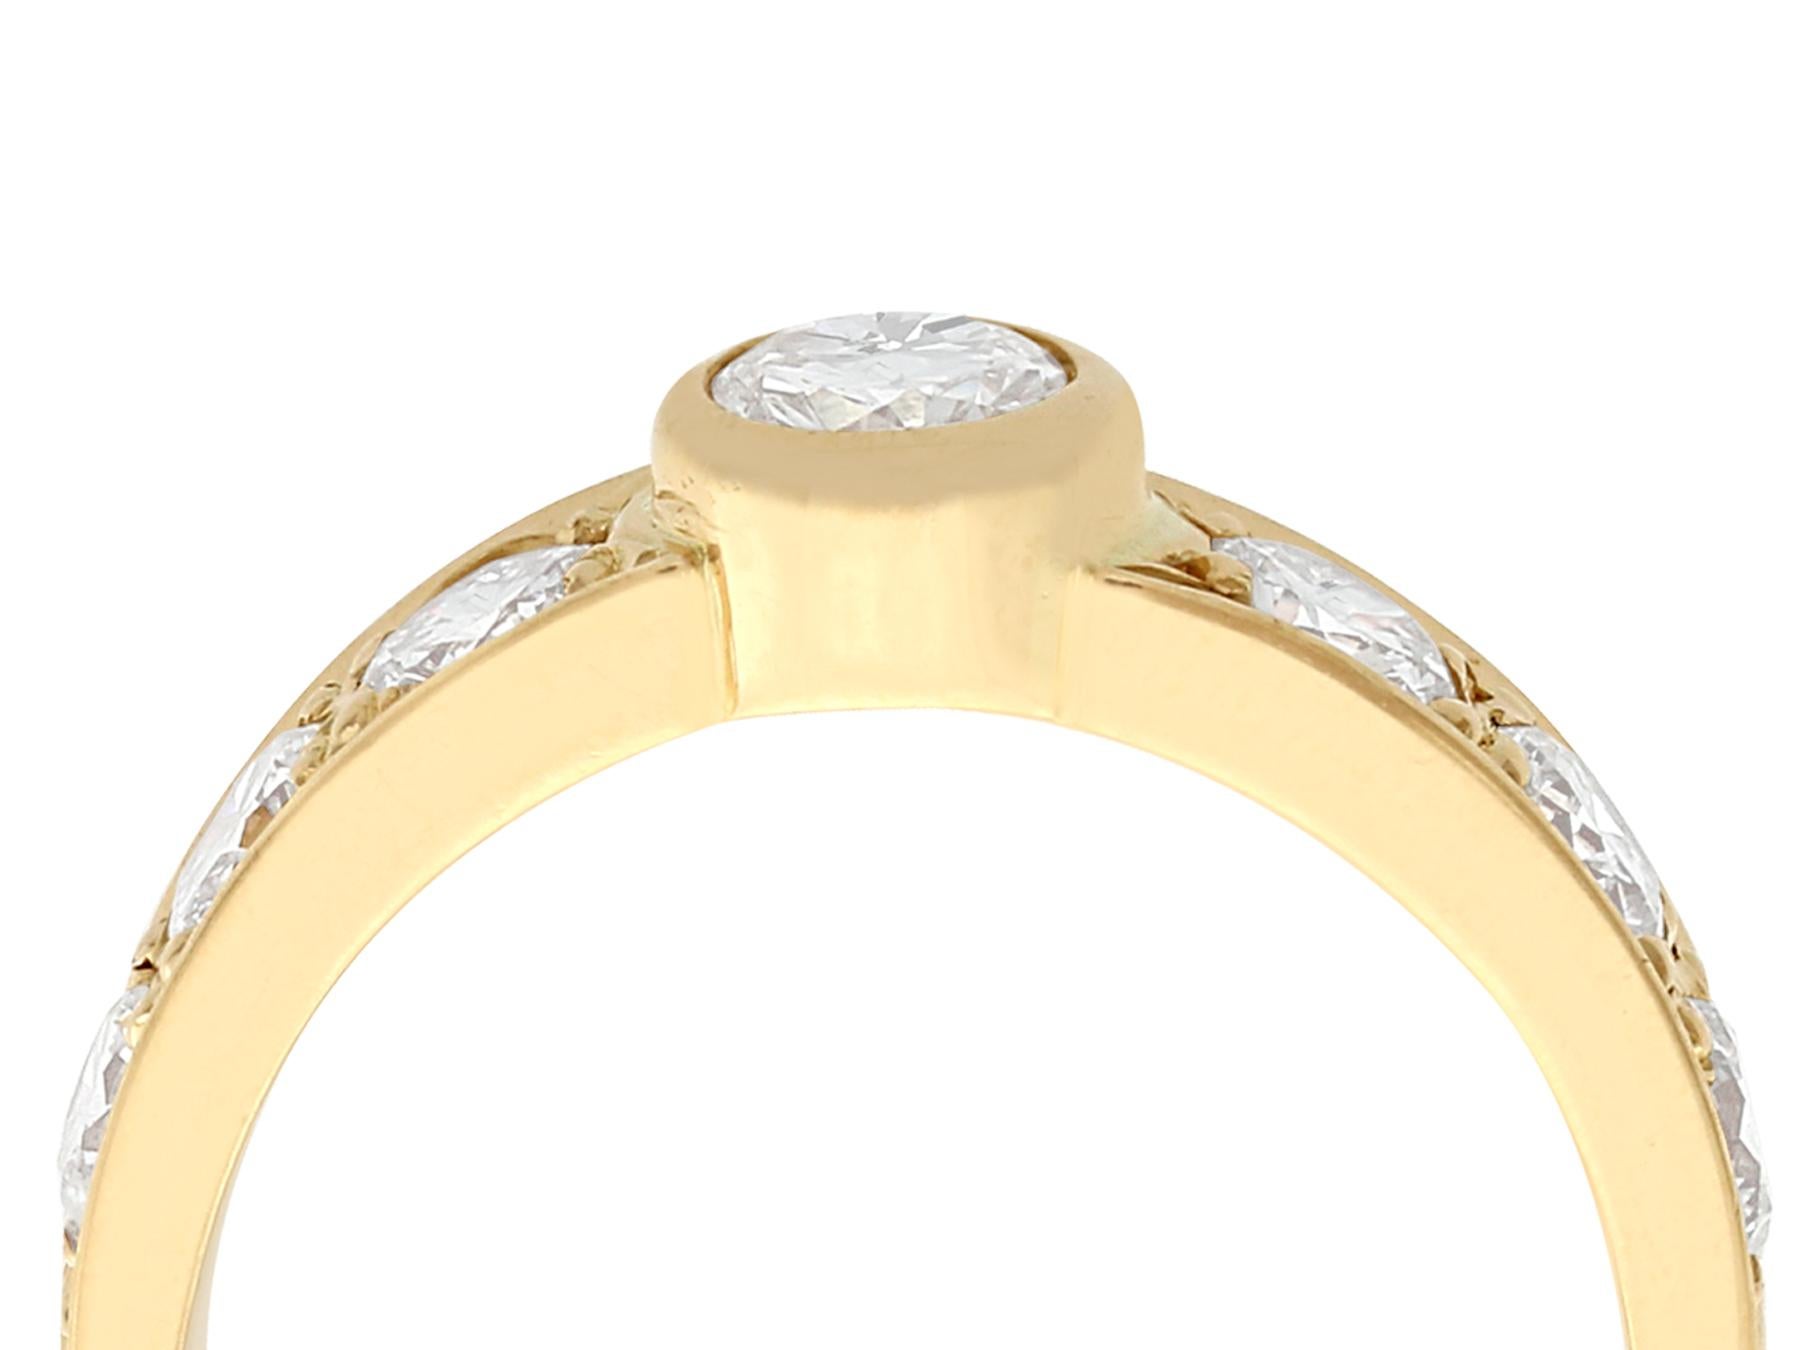 An impressive vintage 1.08 carat diamond and 18 karat yellow gold half eternity ring; part of our diverse diamond jewelry and estate jewelry collections.

This fine and impressive vintage diamond ring has been crafted in 18k yellow gold.

The band